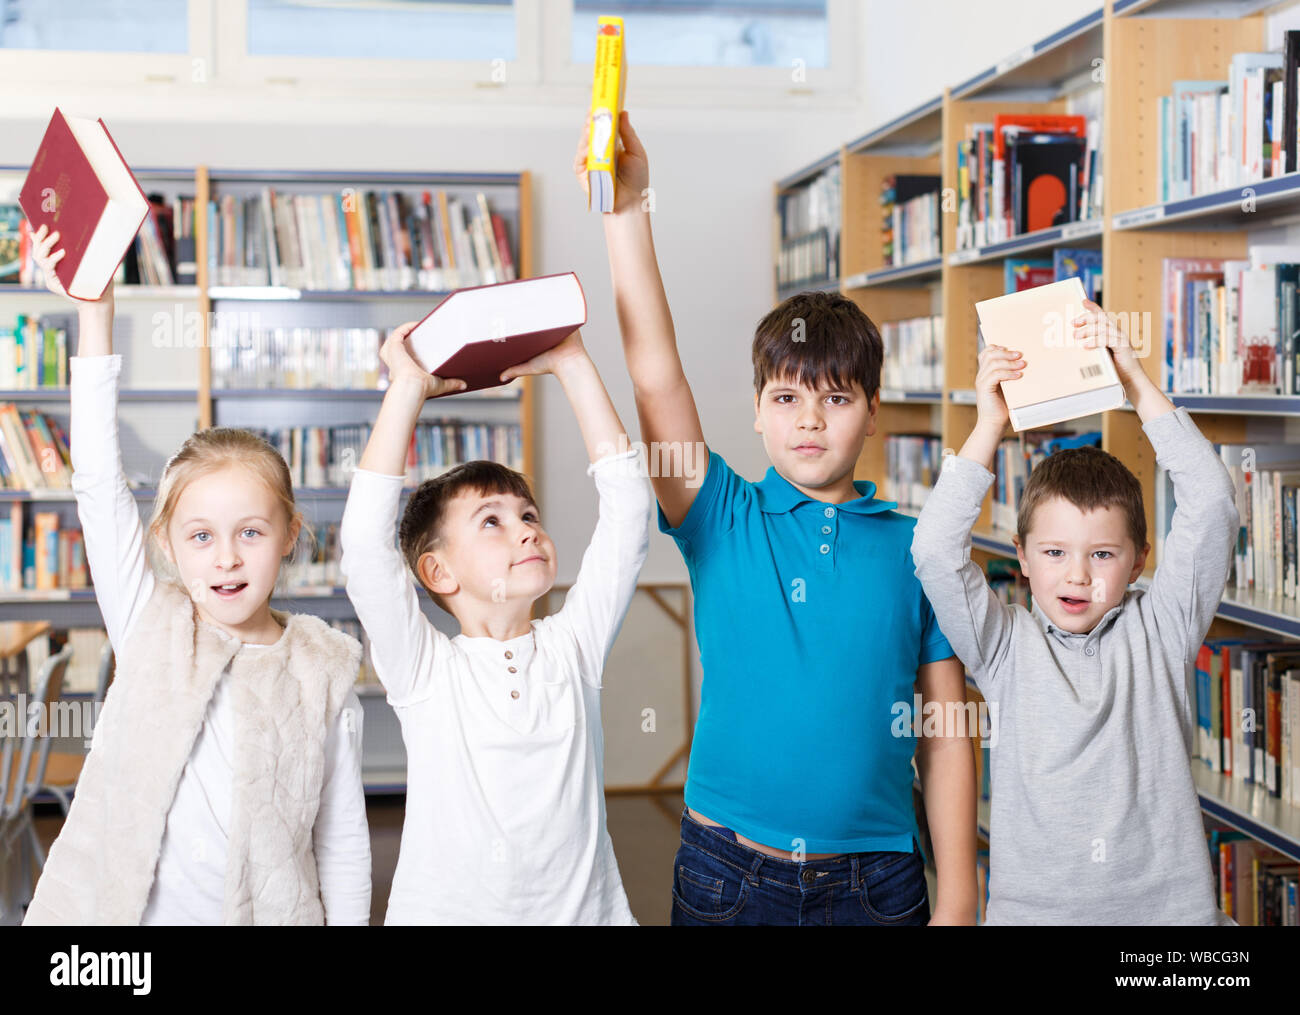 Group portrait of happy children standing with books in hands in modern school library Stock Photo